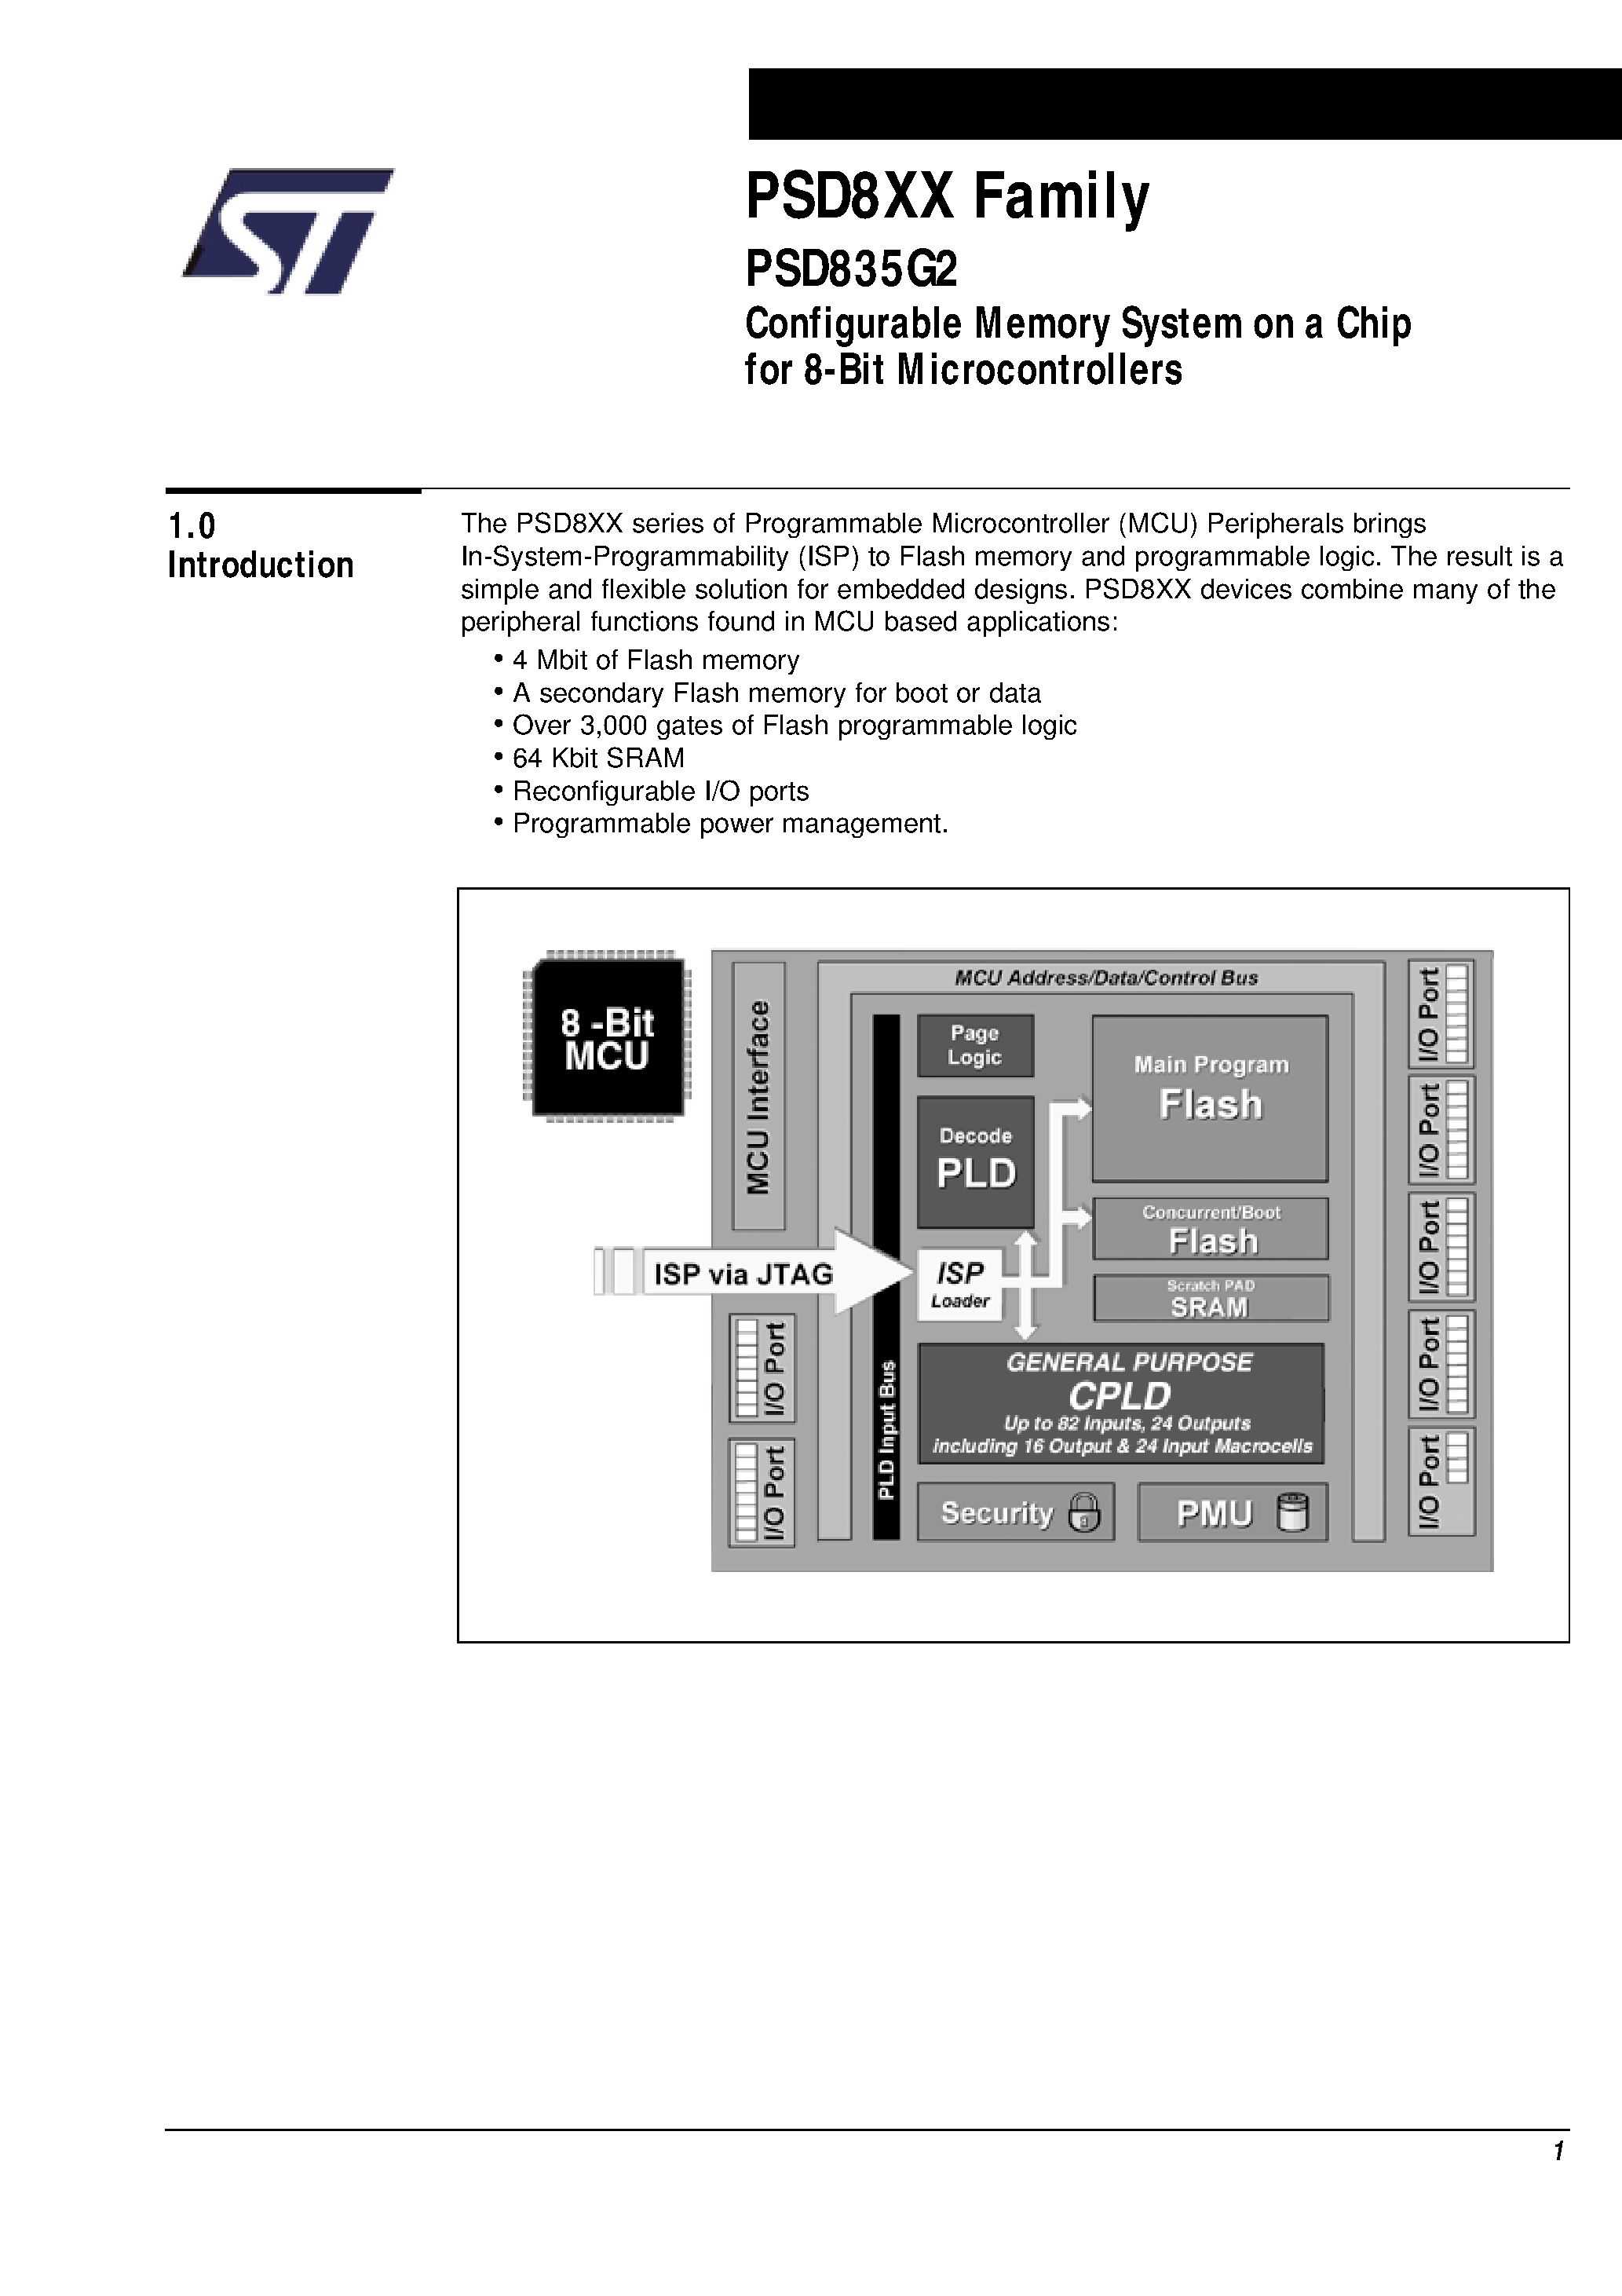 Datasheet PSD835F2-A-90J - Configurable Memory System on a Chip for 8-Bit Microcontrollers page 2